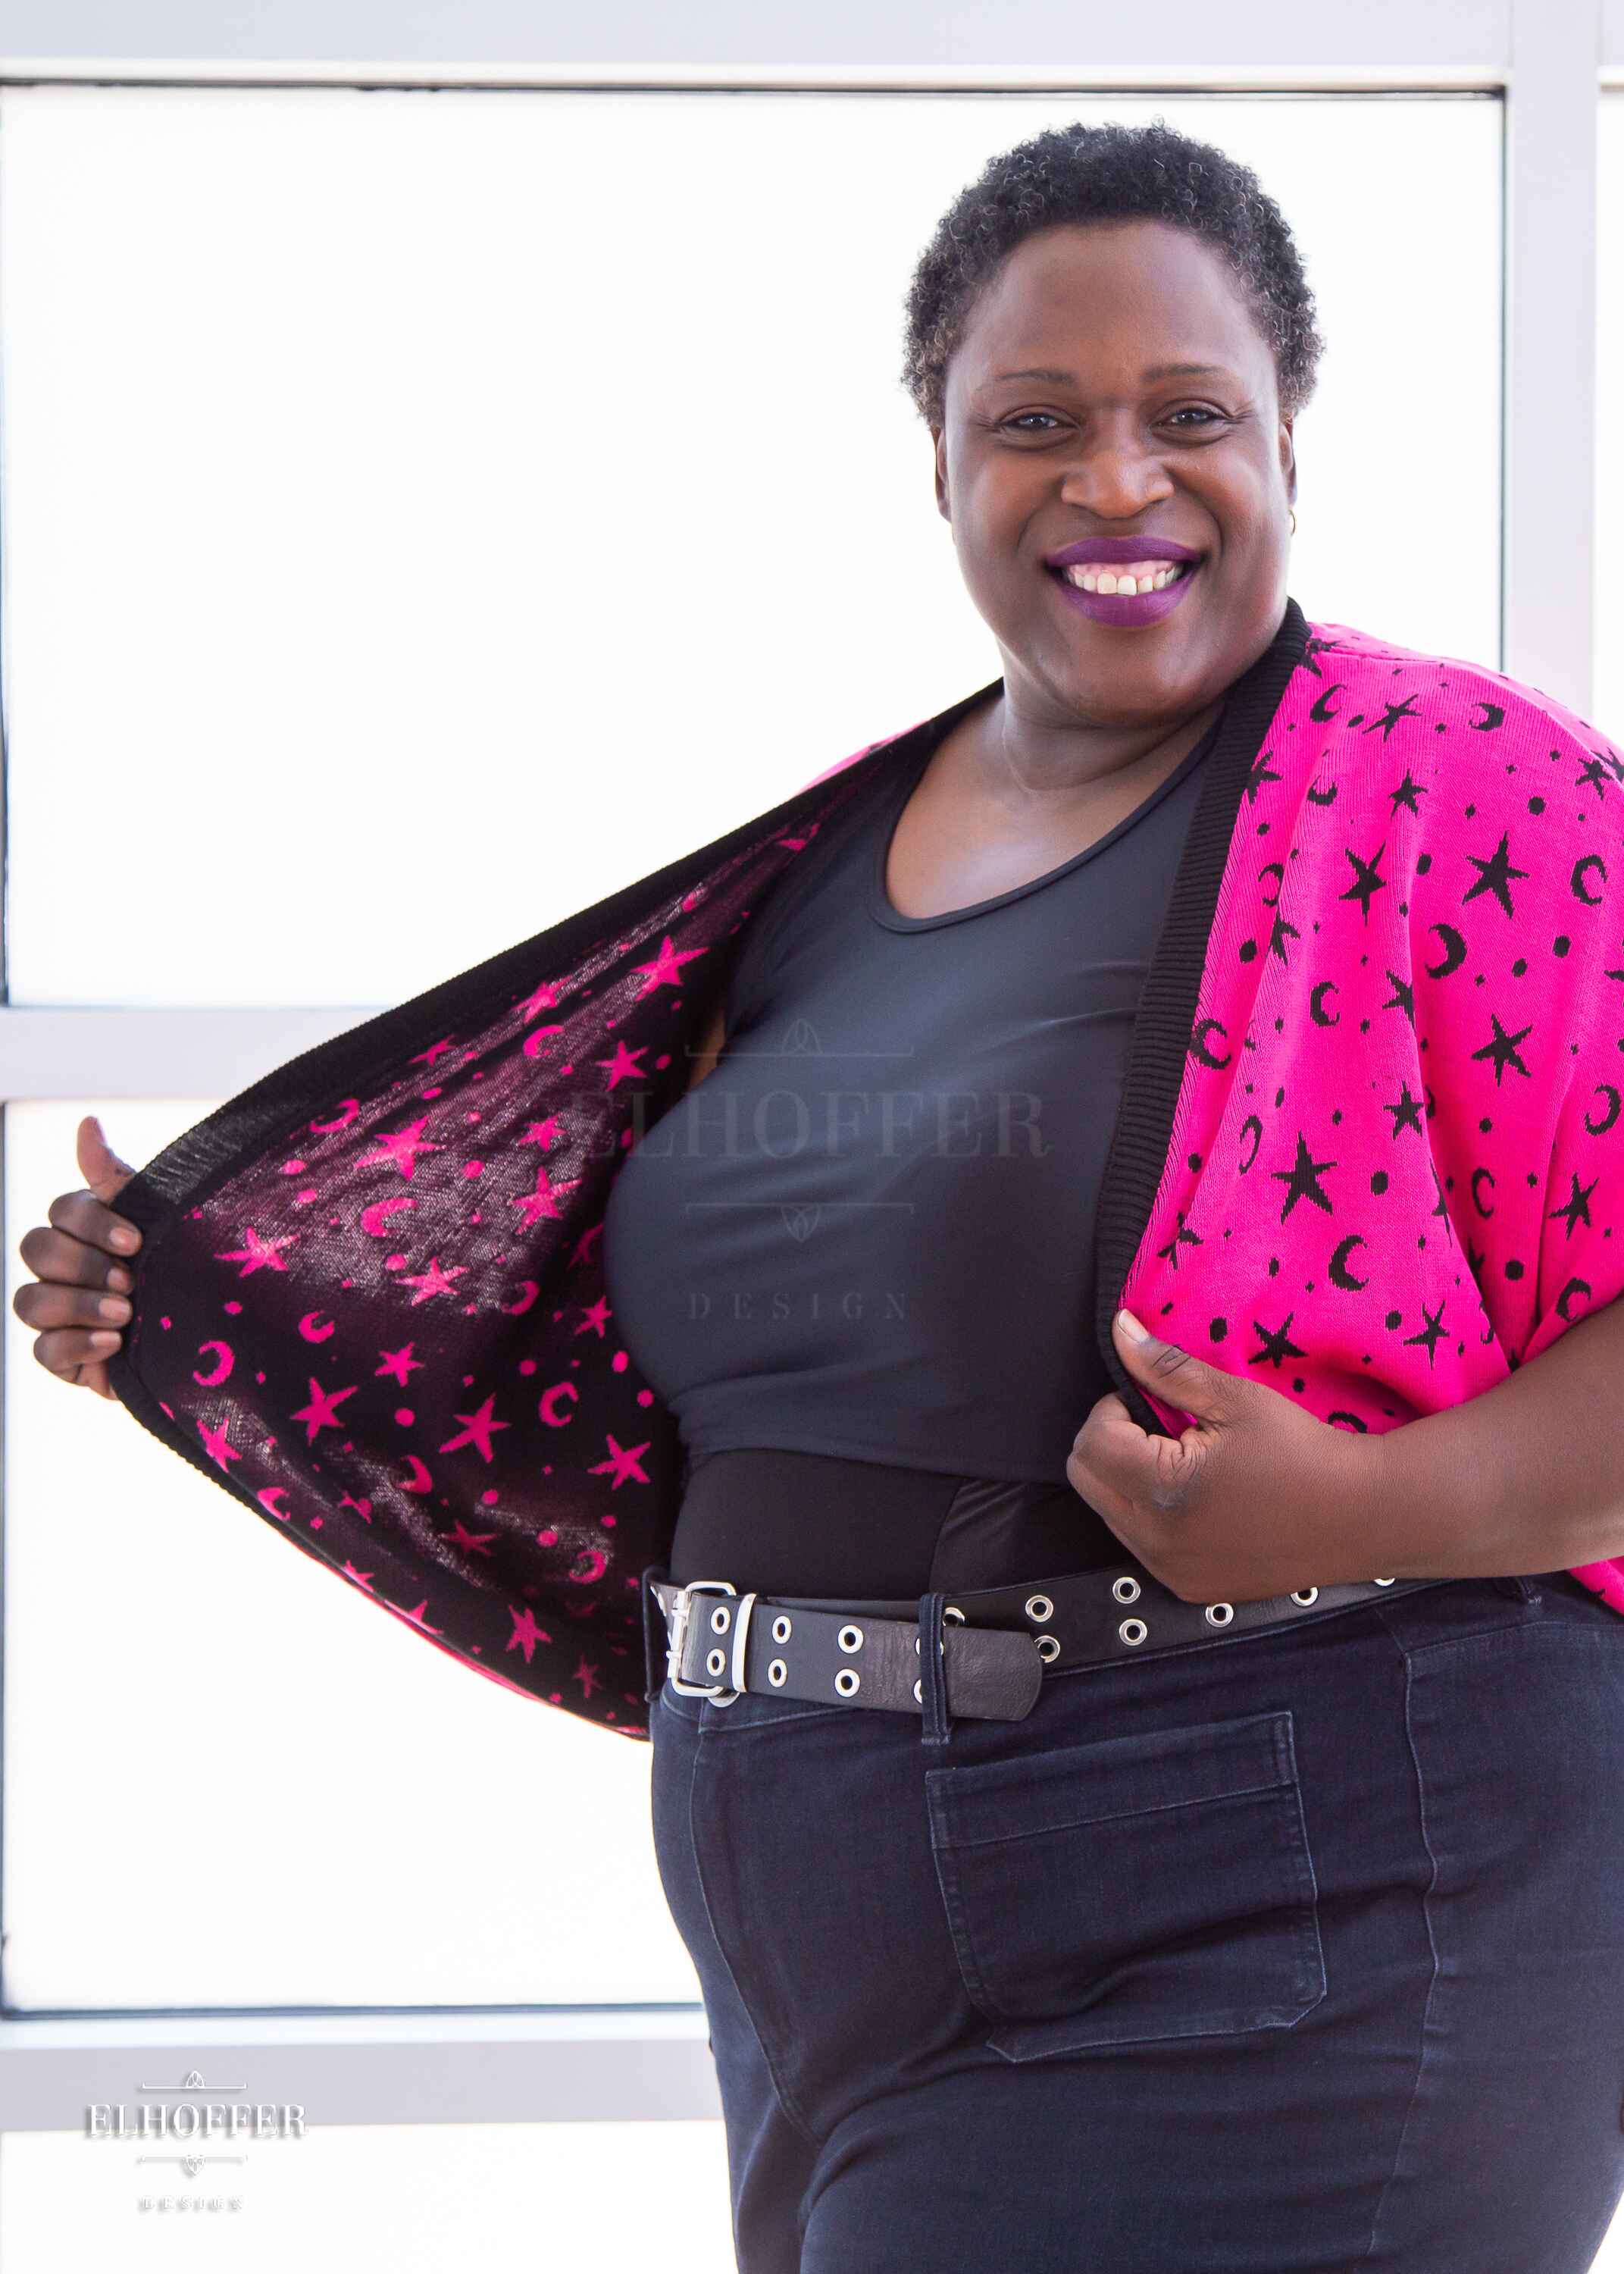 Adalgiza, a medium dark skinned 4xl model with short dark tight curly hair, is smiling while wearing an open front dolman with 3/4 sleeves. The main body of the dolman is bright pink with a black star and moon pattern knit throughout.  The edges and cuffs are ribbed in black.